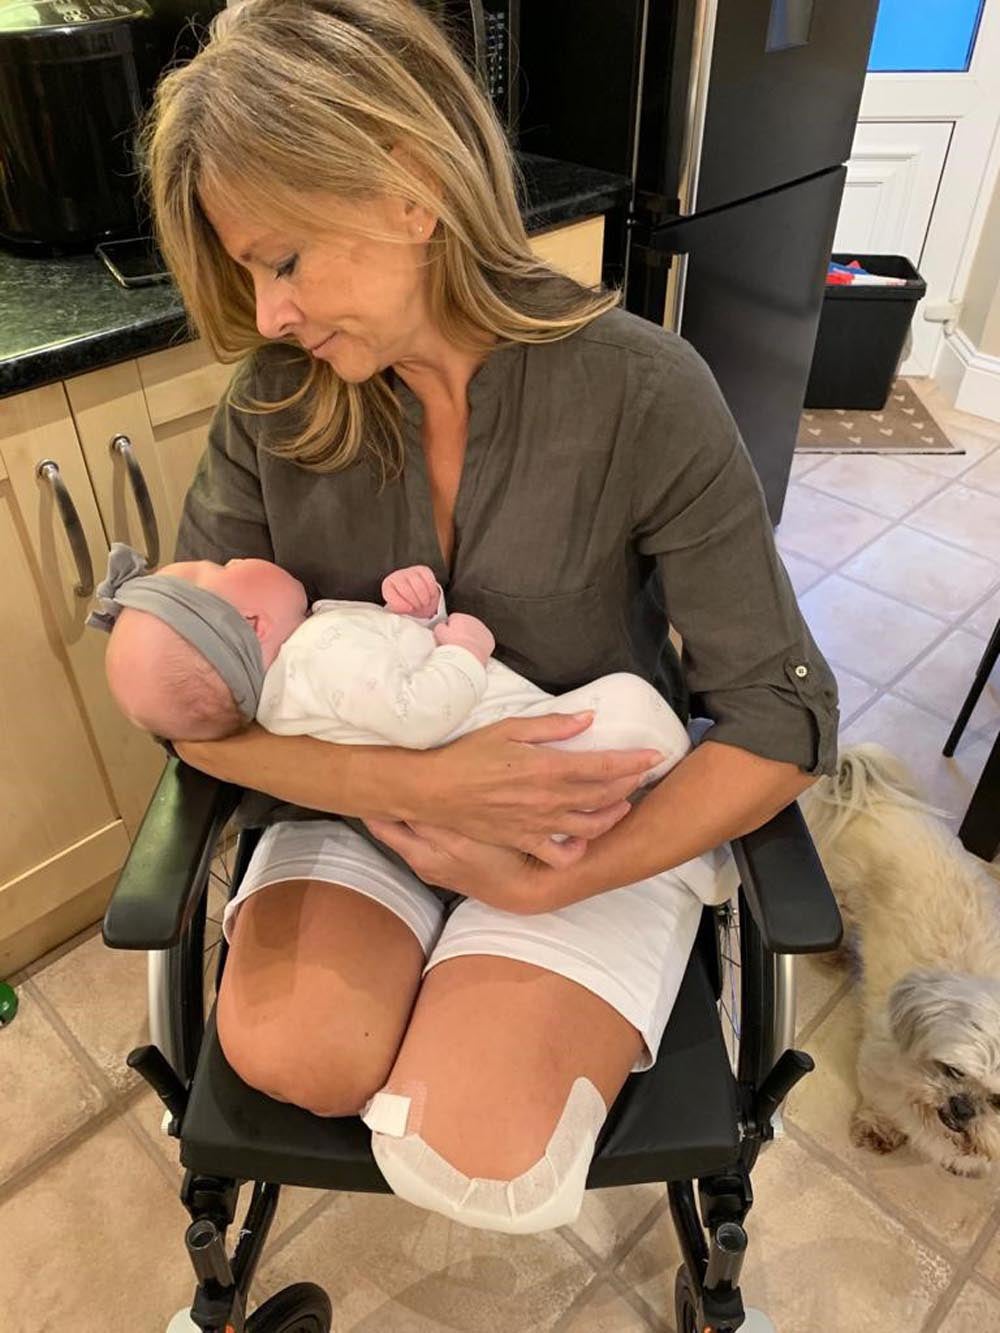 Jo pictured here with Harlow (Collect/PA Real Life)